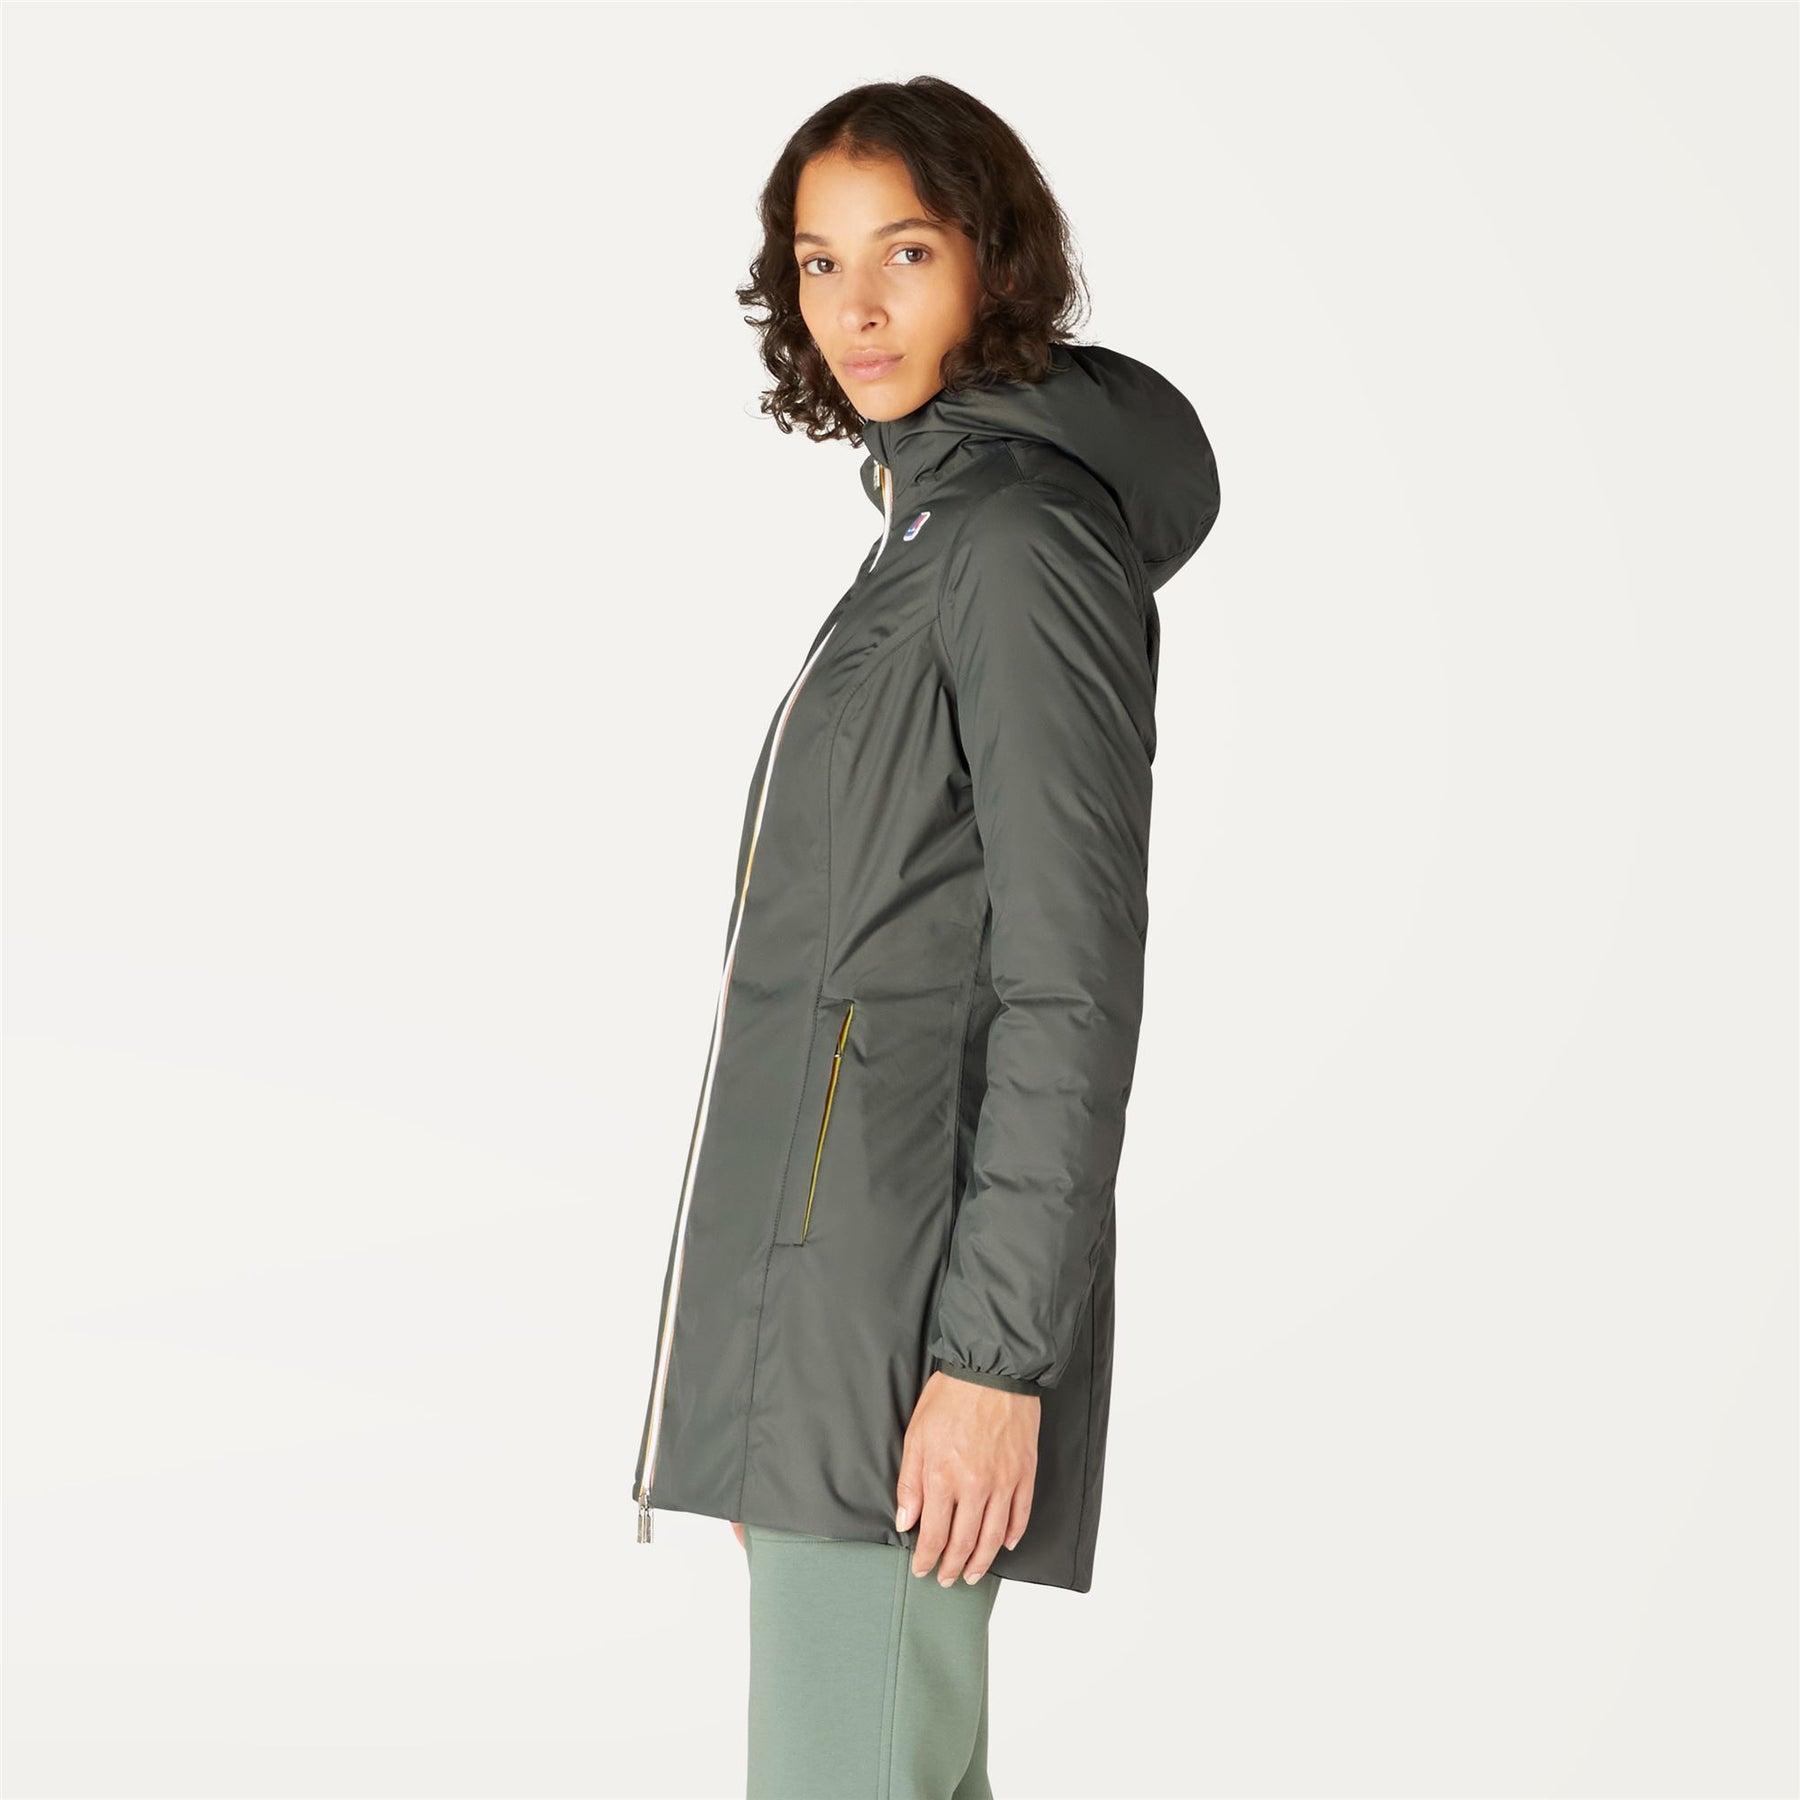 Jackets Woman DENISE THERMO PLUS.2 REVERSIBLE 3/4 Length GREEN BLACKISH ...